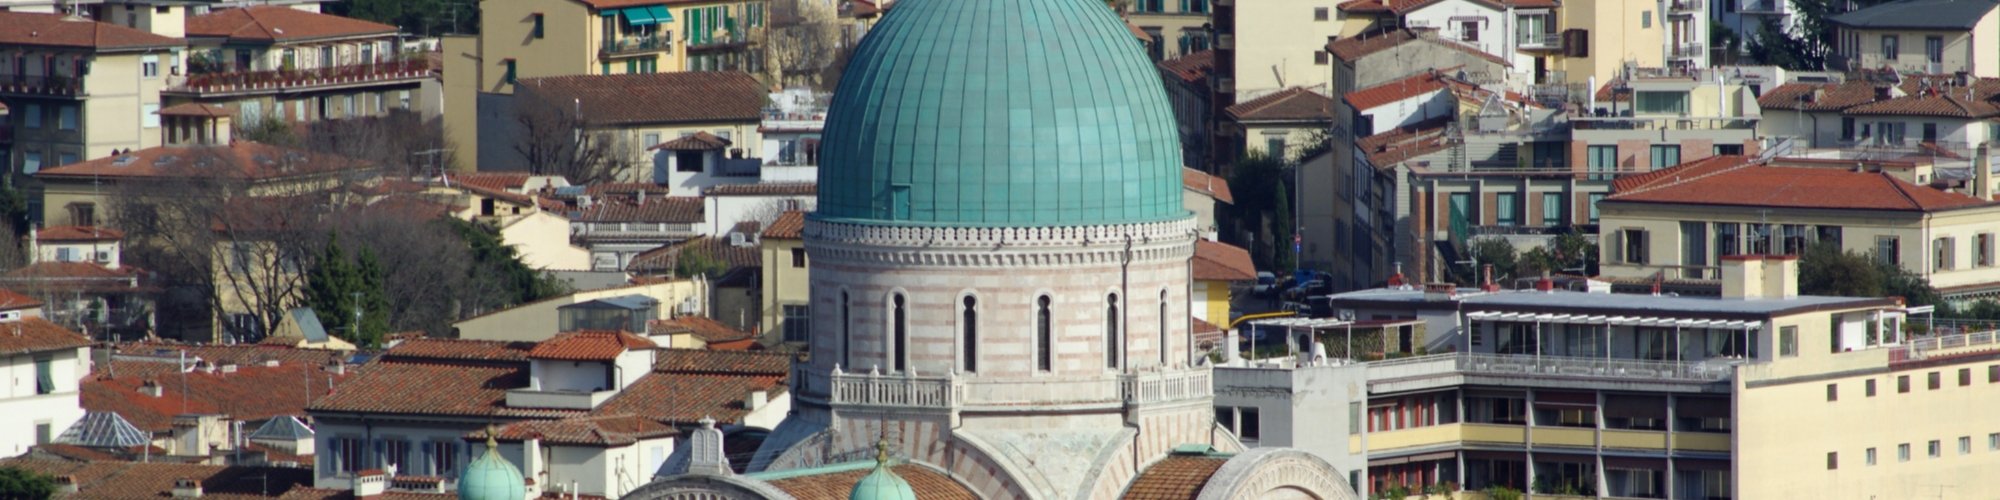 Synagogue of Florence from above